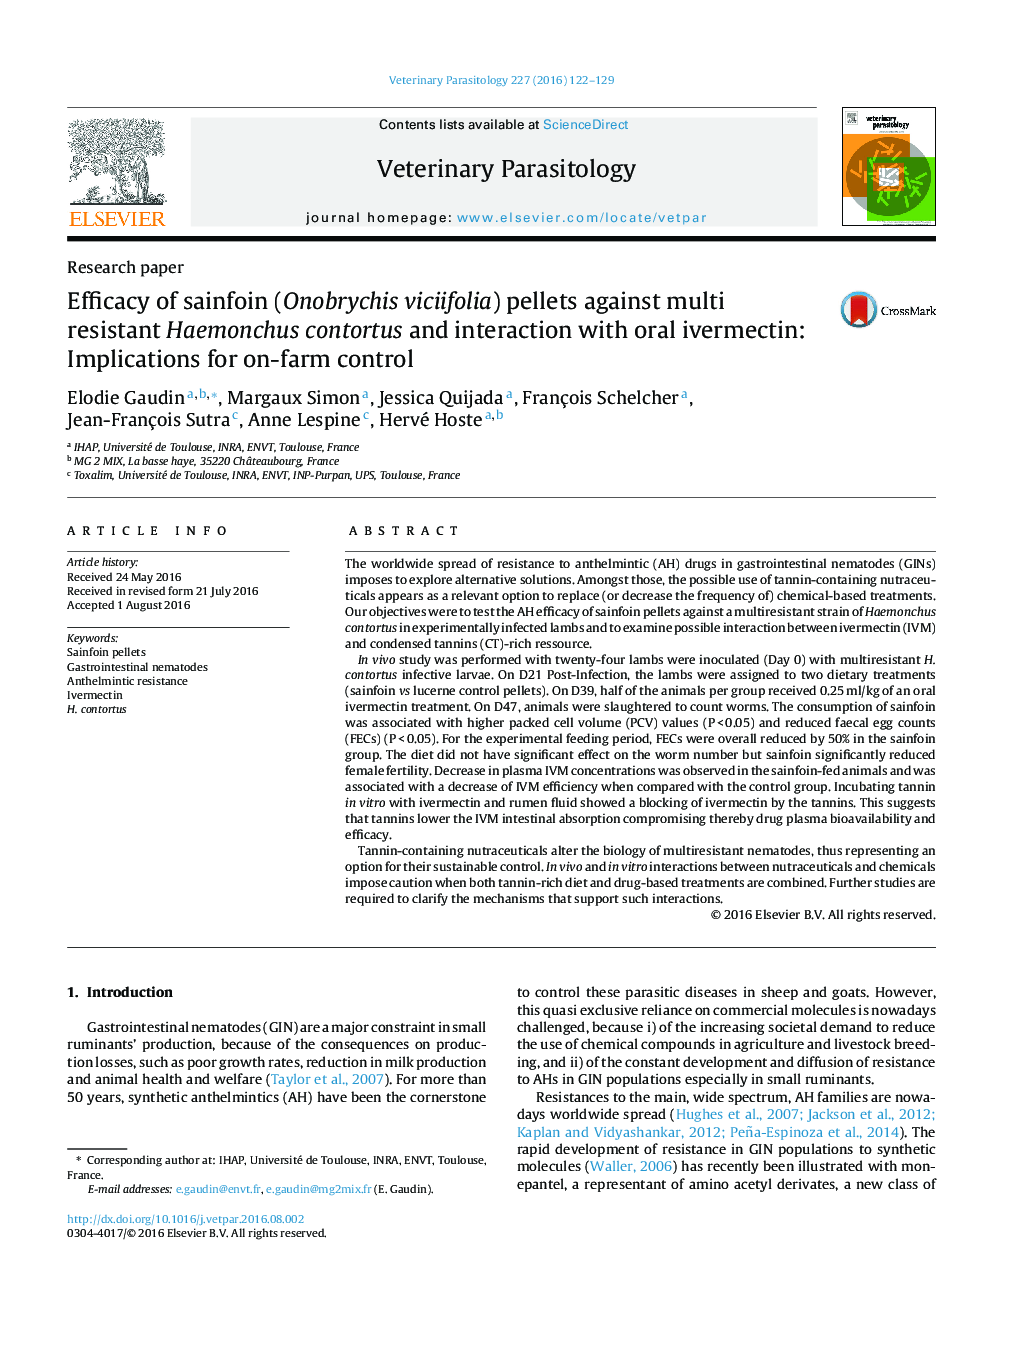 Efficacy of sainfoin (Onobrychis viciifolia) pellets against multi resistant Haemonchus contortus and interaction with oral ivermectin: Implications for on-farm control